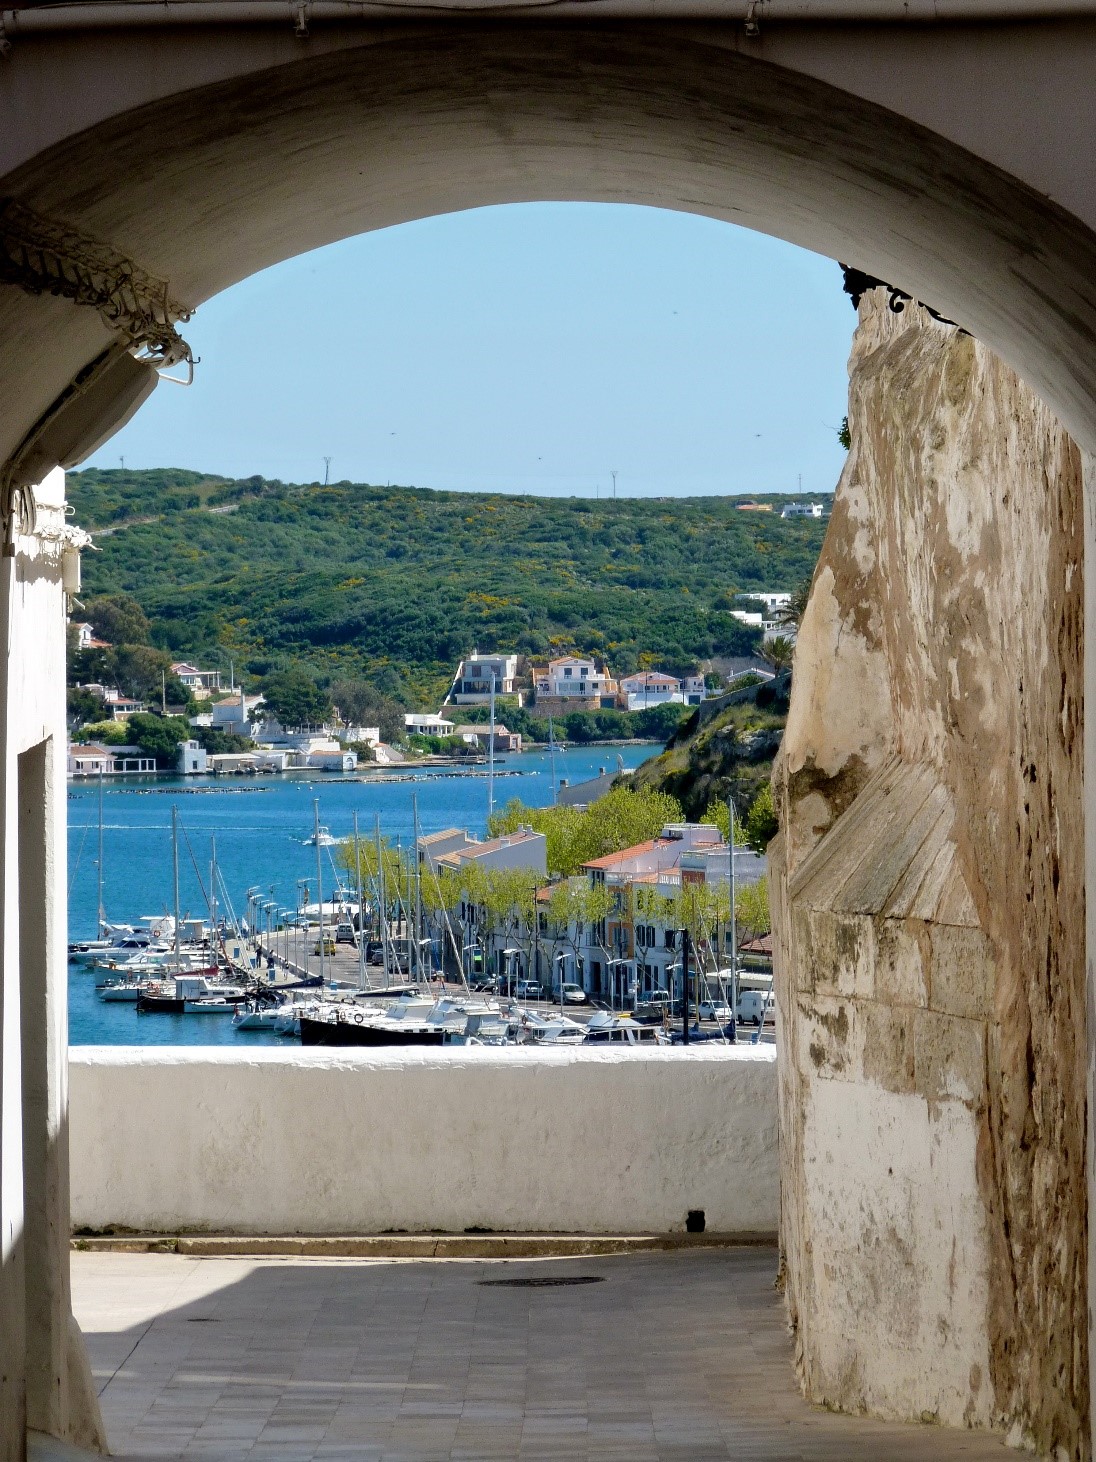 Views of Mahon Harbour from La Mola